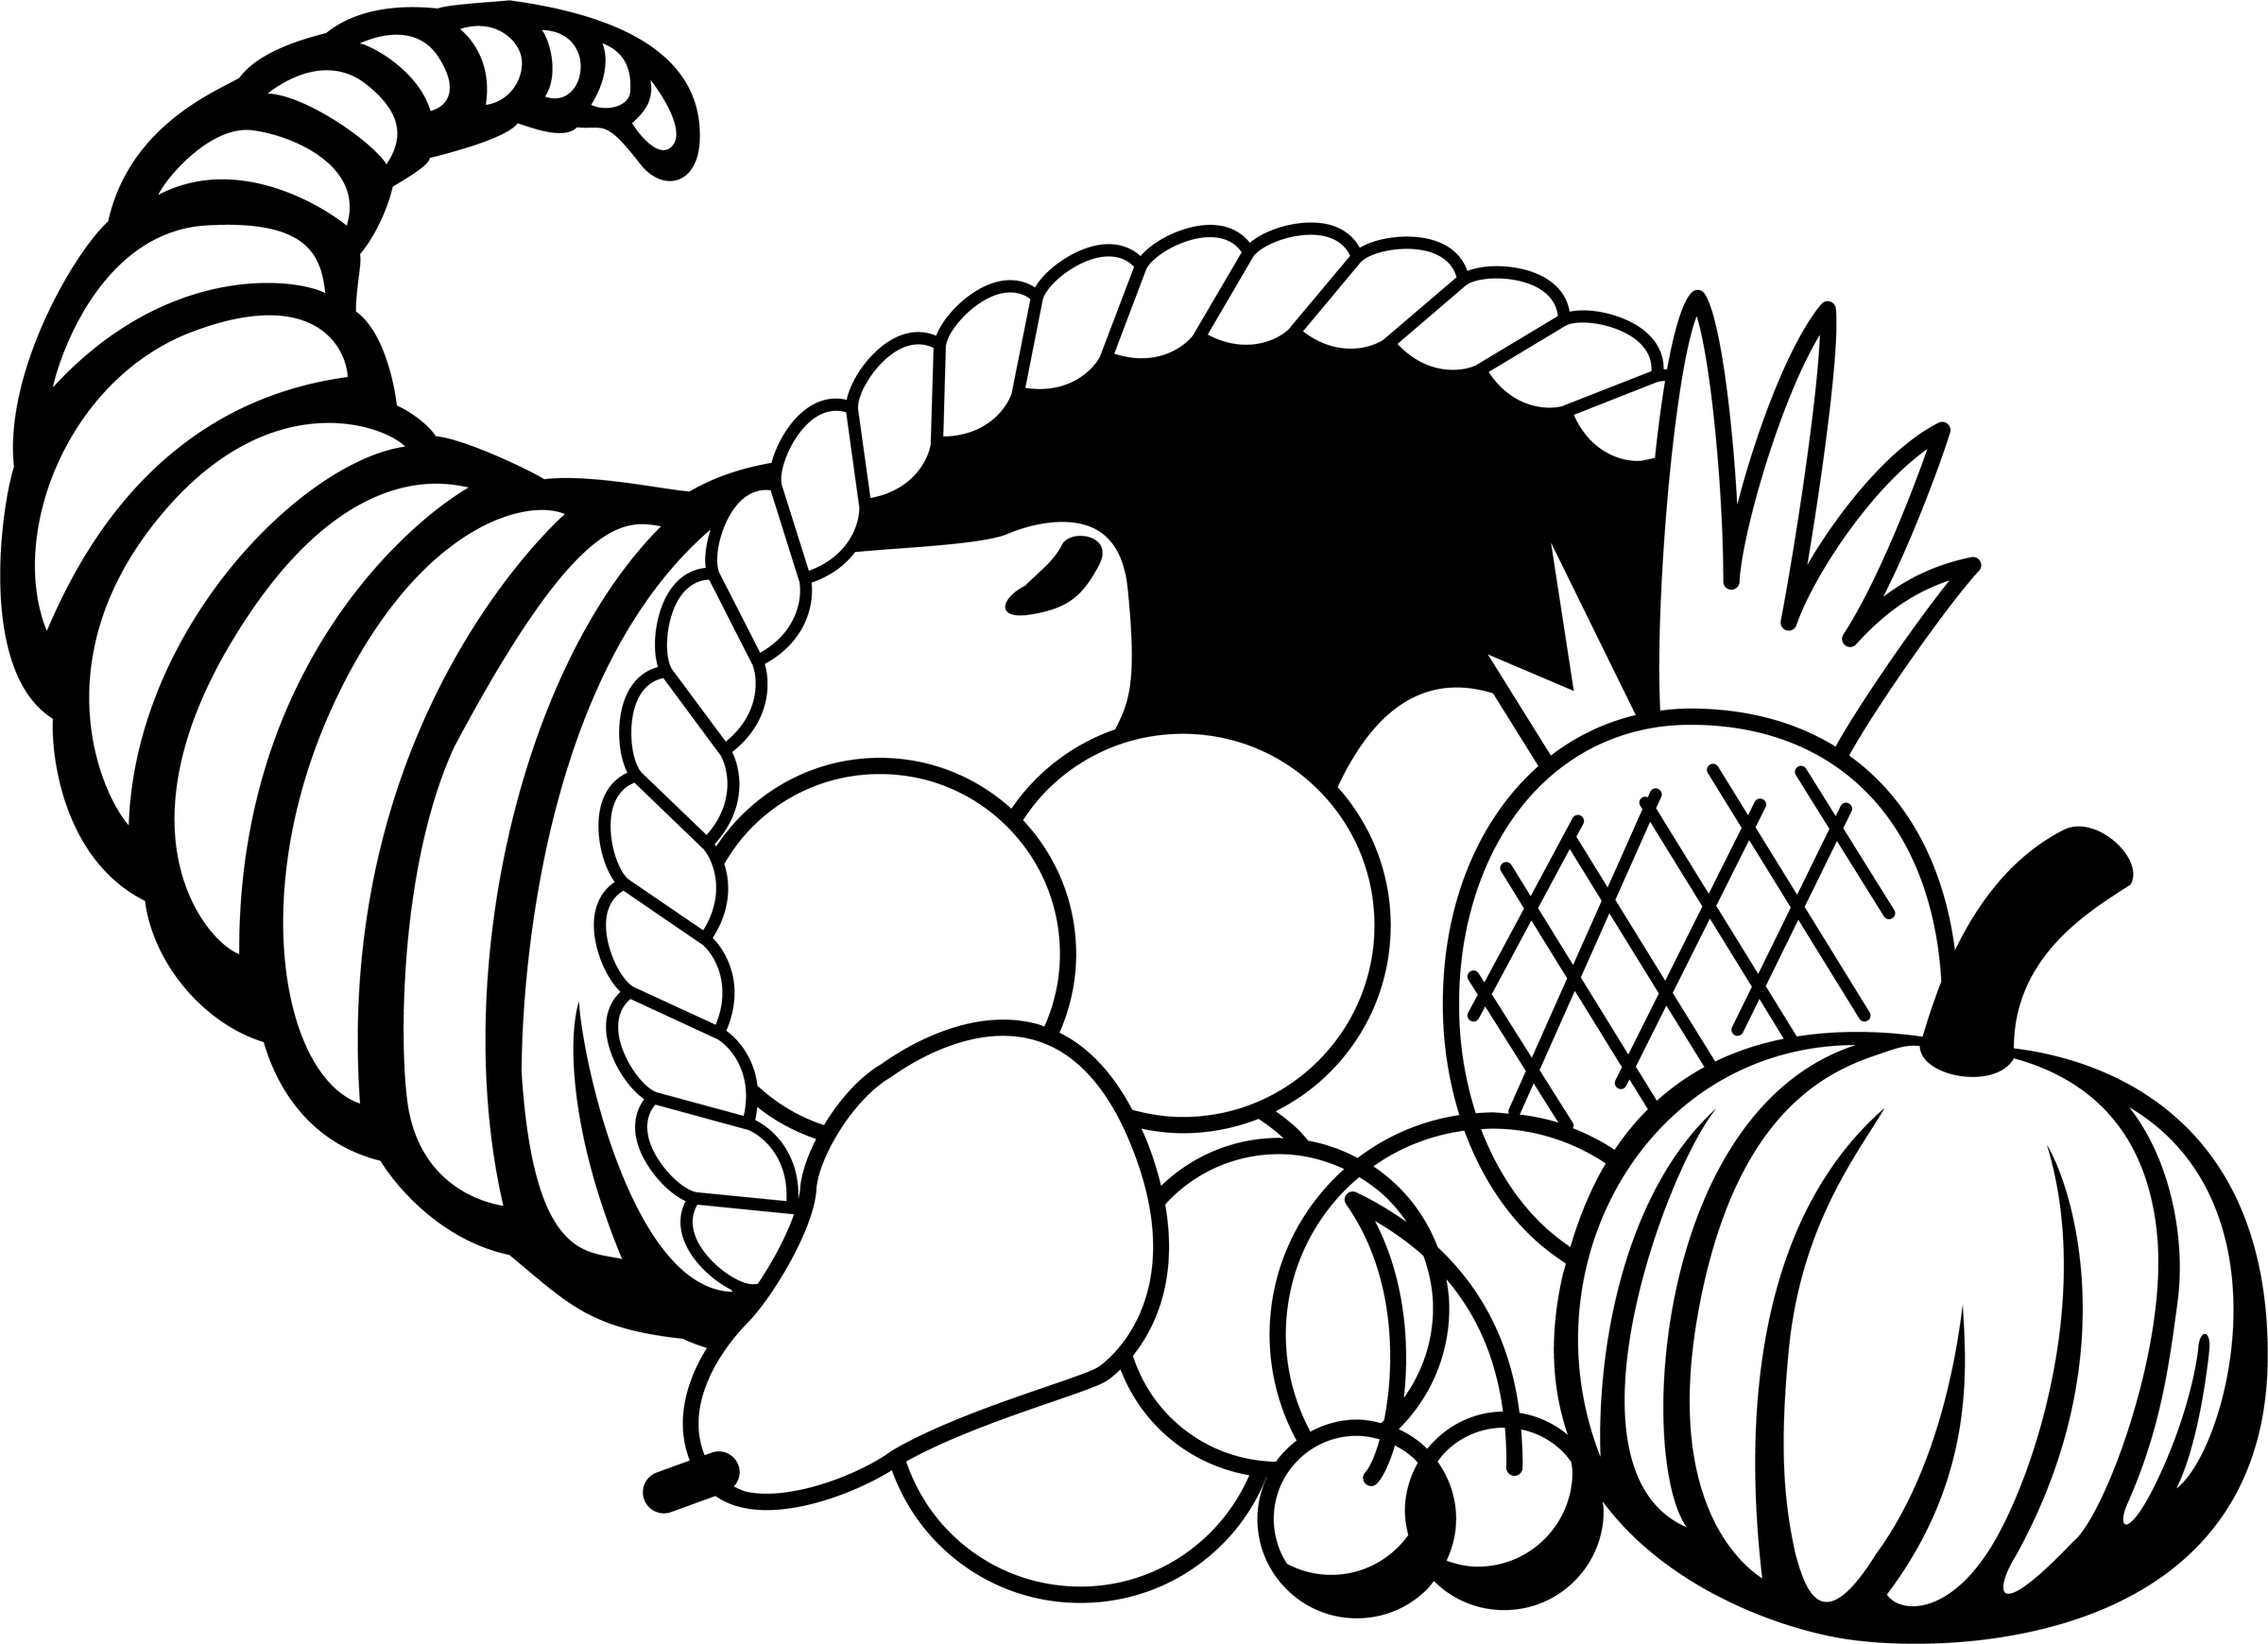 Thanksgiving  black and white free thanksgiving black and white clipart borders happy